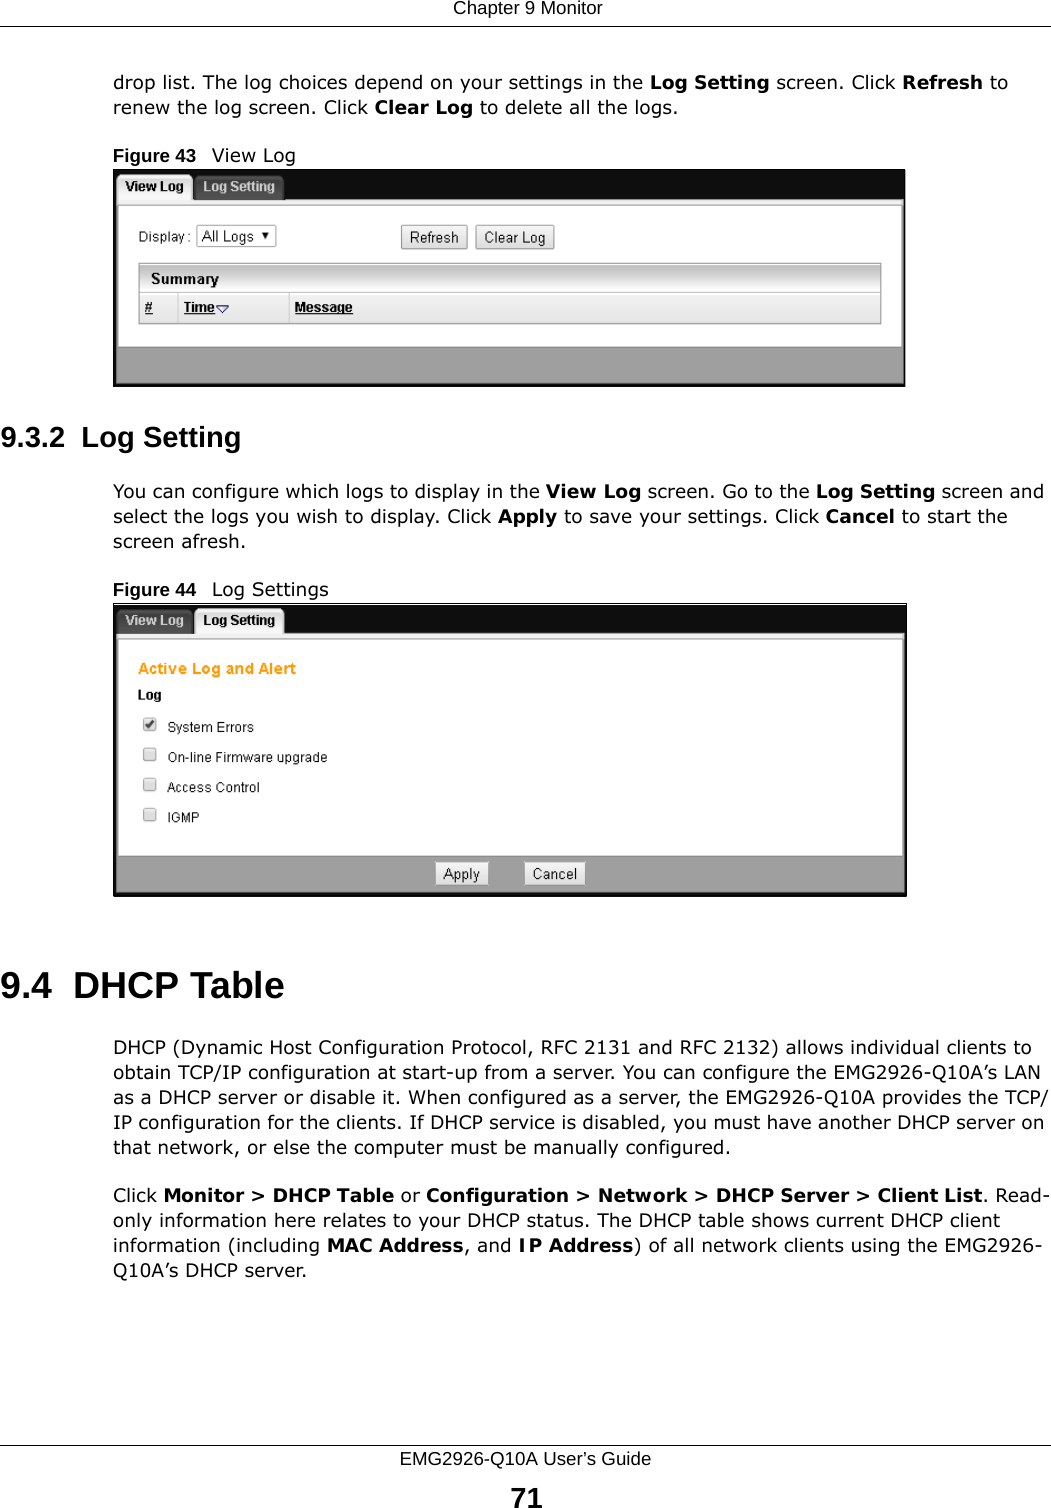  Chapter 9 MonitorEMG2926-Q10A User’s Guide71drop list. The log choices depend on your settings in the Log Setting screen. Click Refresh to renew the log screen. Click Clear Log to delete all the logs.Figure 43   View Log9.3.2  Log SettingYou can configure which logs to display in the View Log screen. Go to the Log Setting screen and select the logs you wish to display. Click Apply to save your settings. Click Cancel to start the screen afresh.Figure 44   Log Settings9.4  DHCP Table    DHCP (Dynamic Host Configuration Protocol, RFC 2131 and RFC 2132) allows individual clients to obtain TCP/IP configuration at start-up from a server. You can configure the EMG2926-Q10A’s LAN as a DHCP server or disable it. When configured as a server, the EMG2926-Q10A provides the TCP/IP configuration for the clients. If DHCP service is disabled, you must have another DHCP server on that network, or else the computer must be manually configured.Click Monitor &gt; DHCP Table or Configuration &gt; Network &gt; DHCP Server &gt; Client List. Read-only information here relates to your DHCP status. The DHCP table shows current DHCP client information (including MAC Address, and IP Address) of all network clients using the EMG2926-Q10A’s DHCP server. 